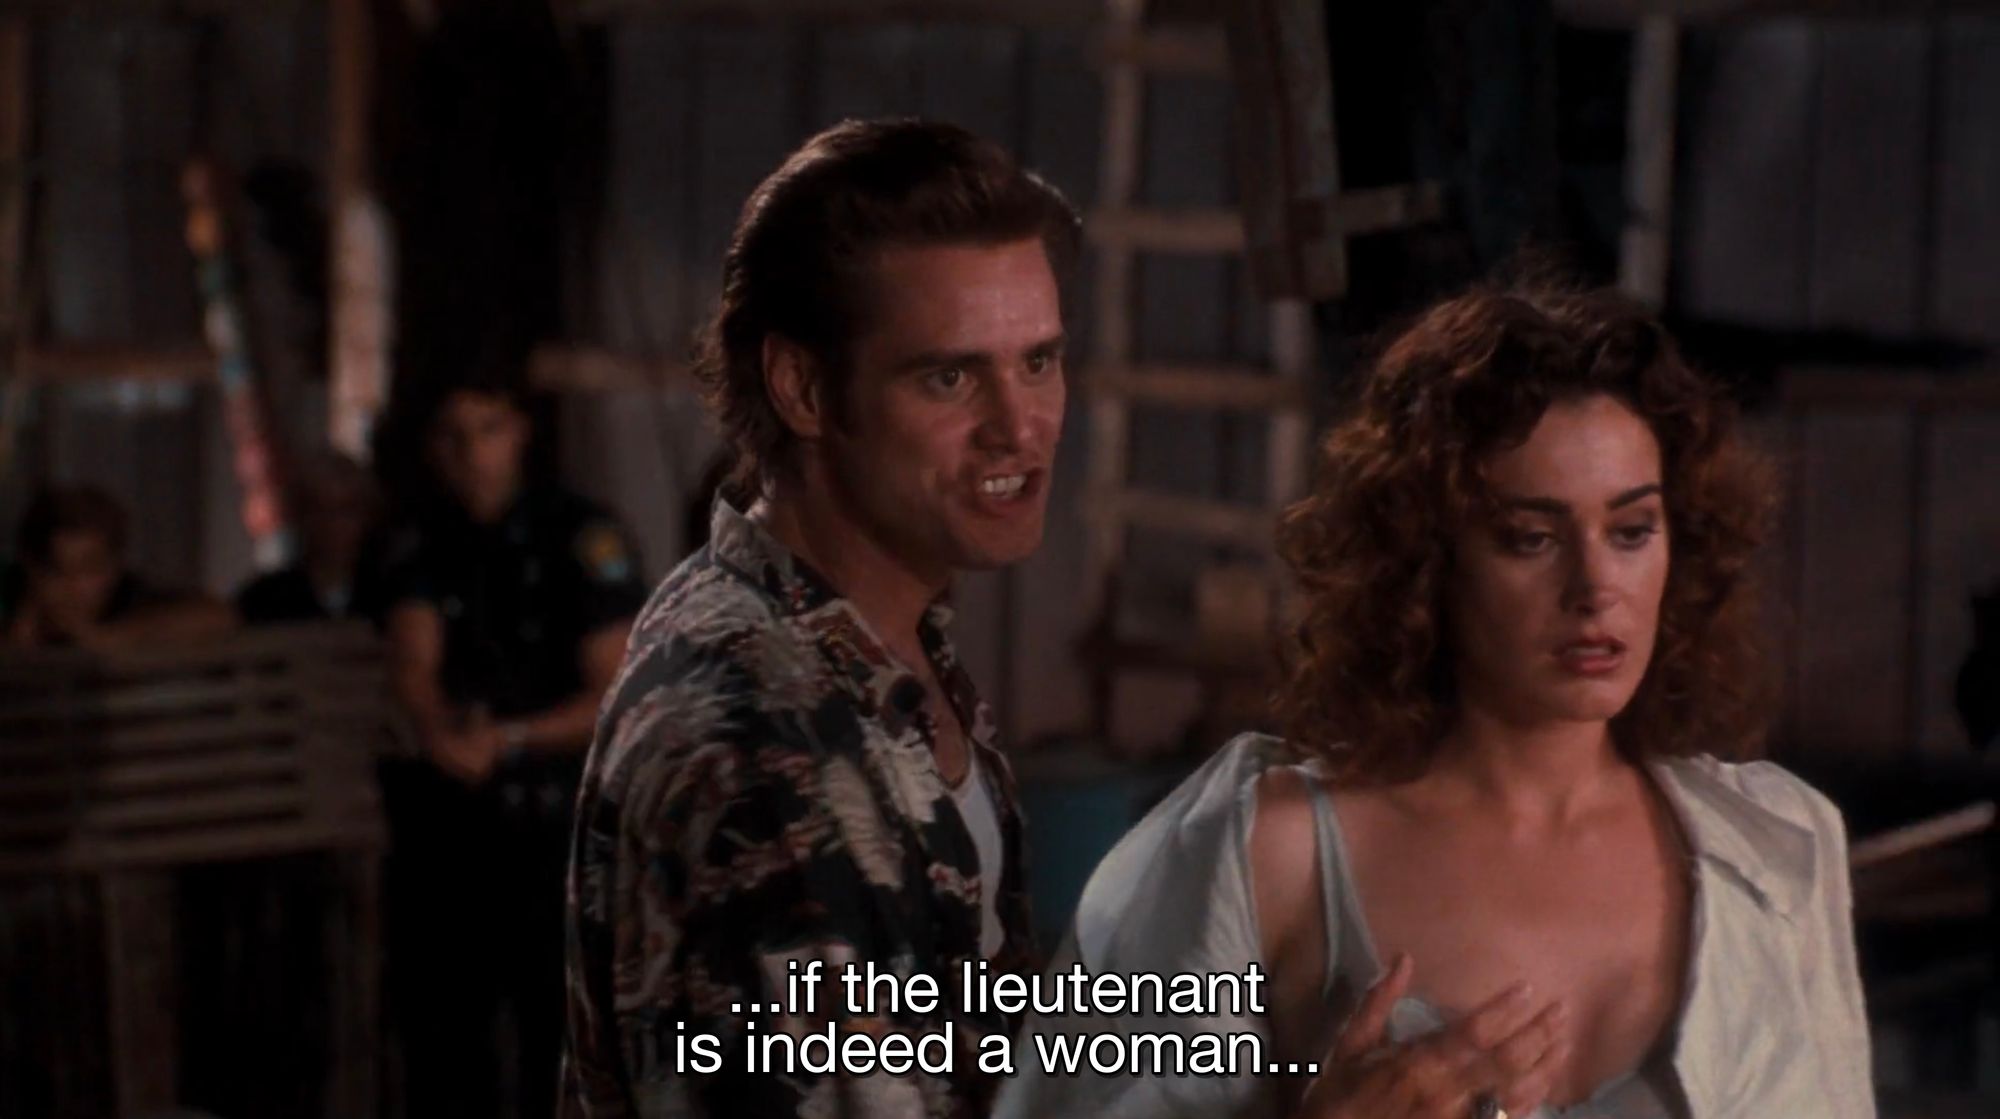 How I Grew Up Transphobic (With Ace Ventura)